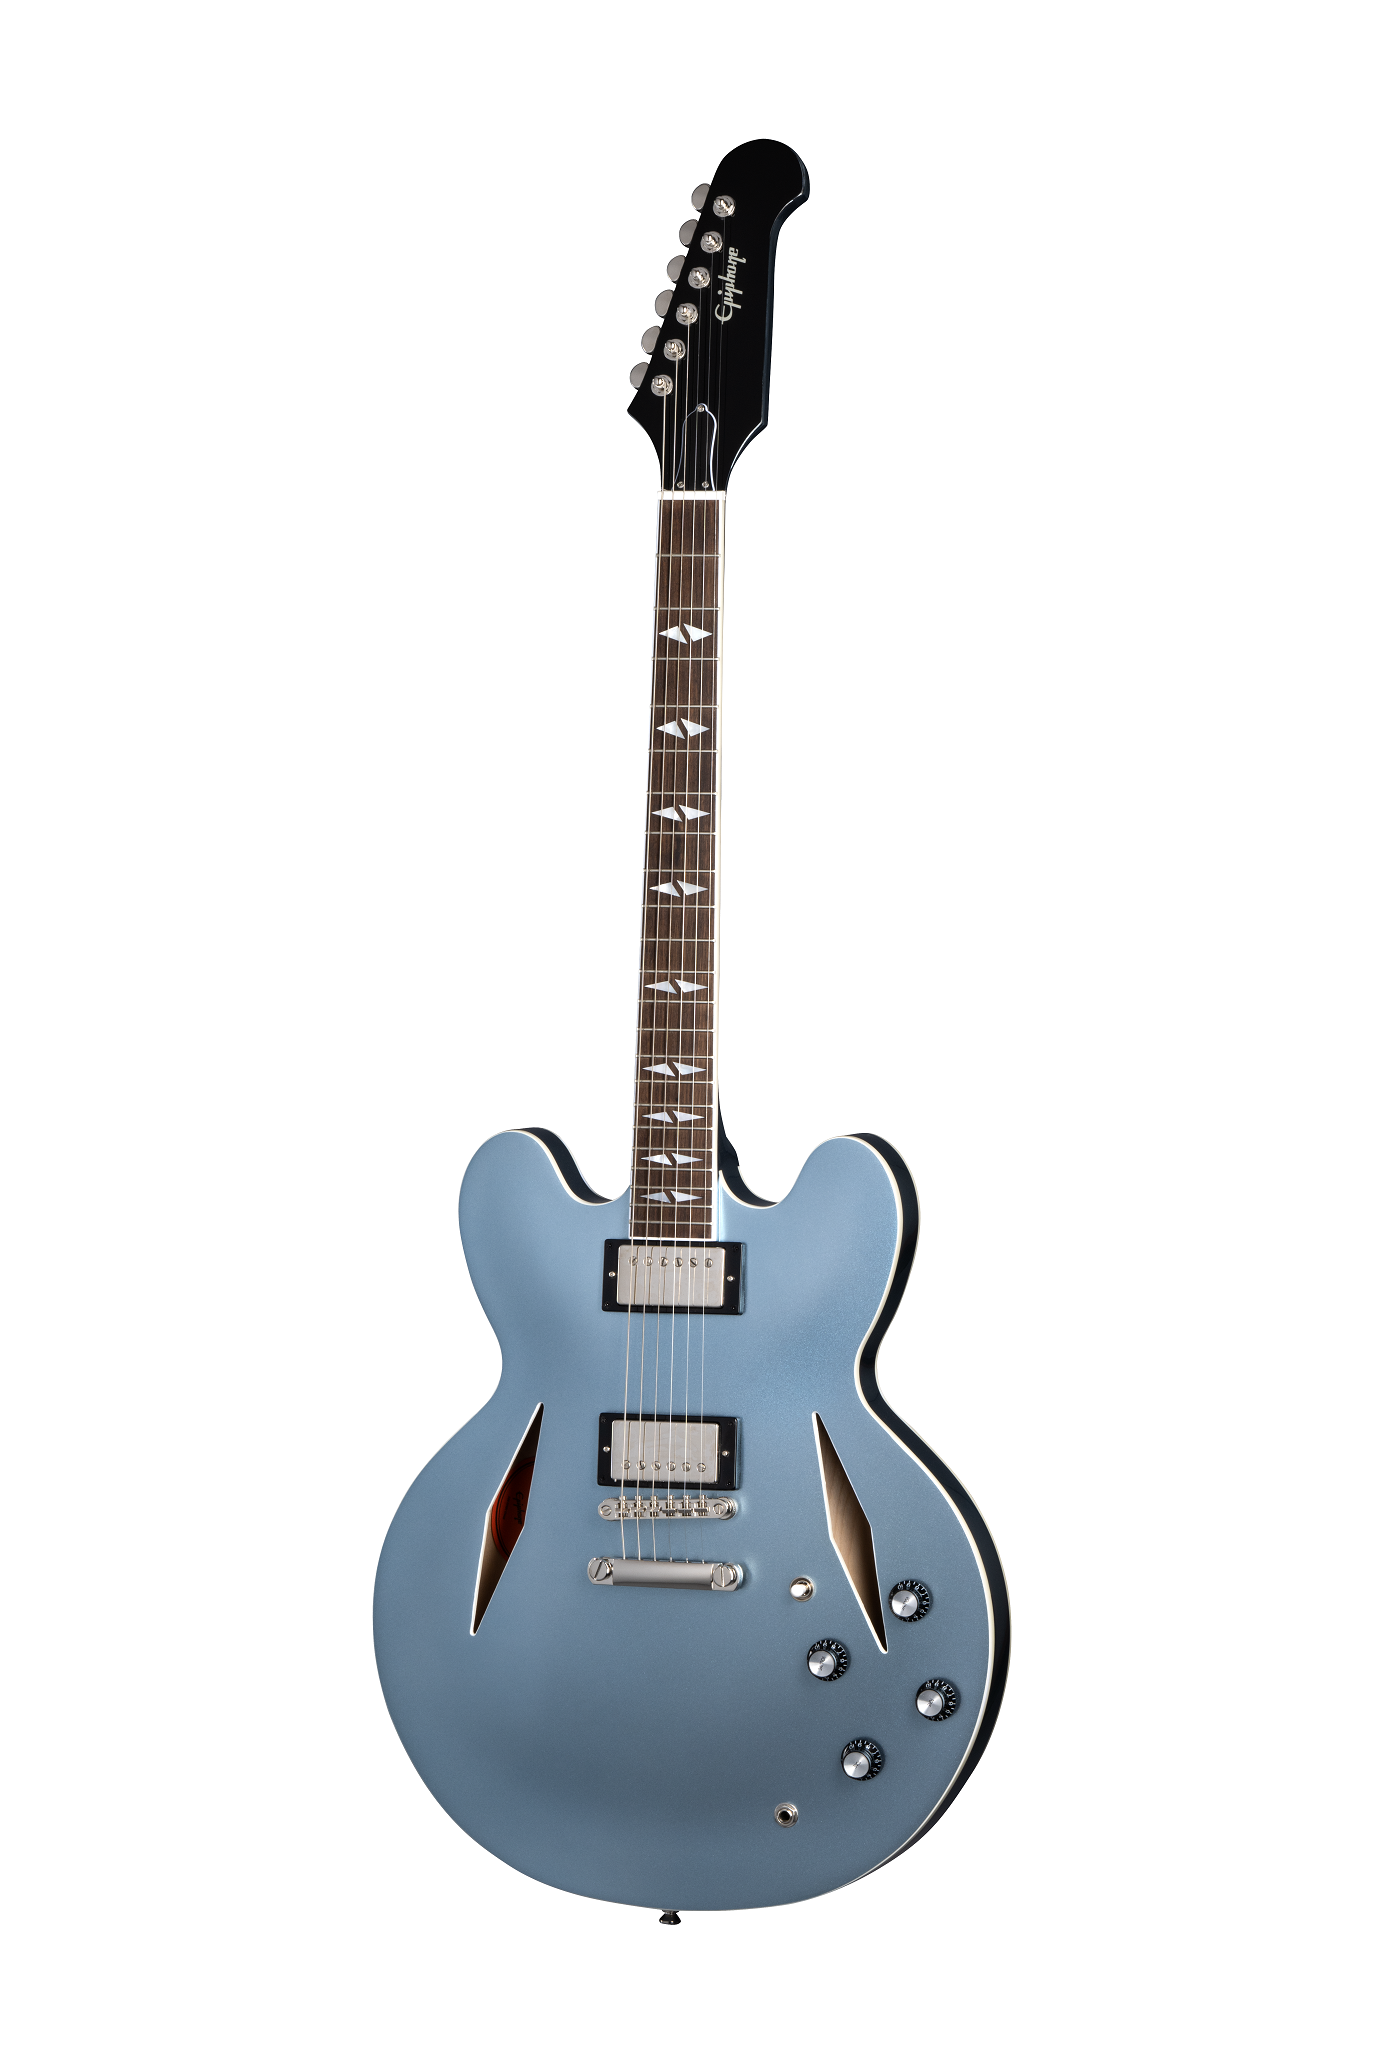 Epiphone Inspired by Gibson Dave Grohl DG-335 w/ Hard Shell Case EIGCDG335PENH Pelham Blue